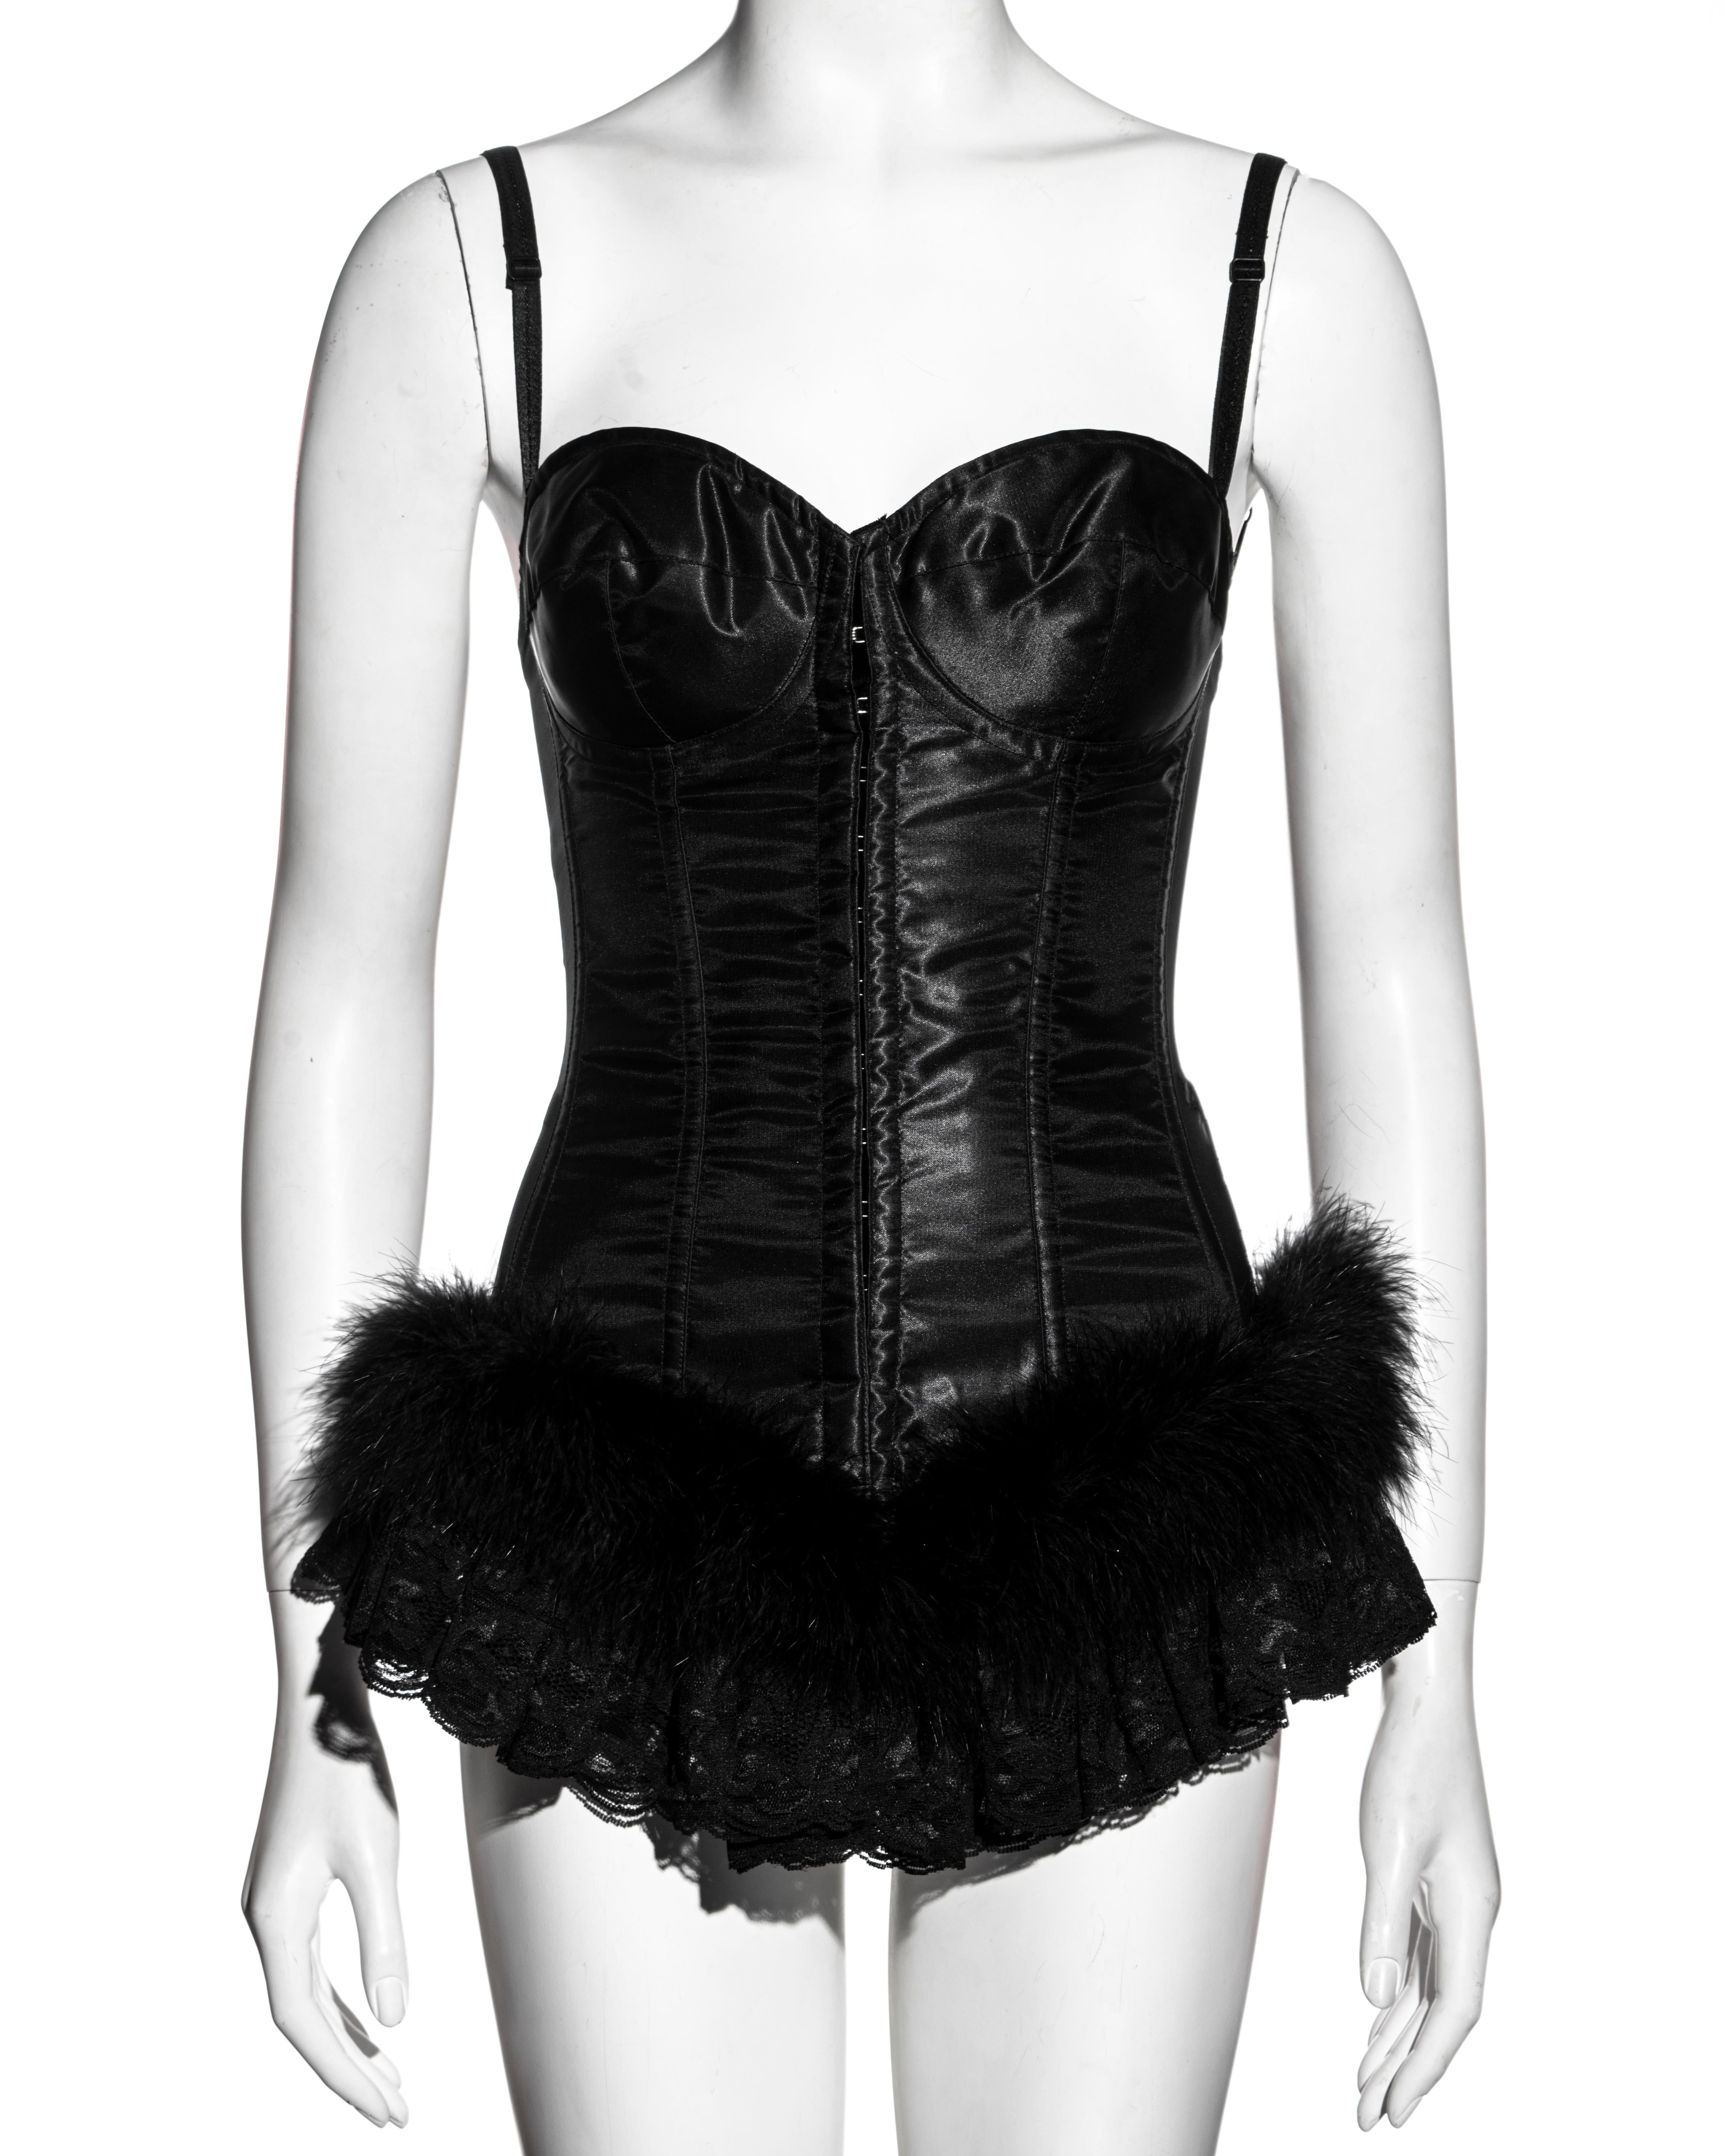 ▪ Dolce & Gabbana black black corset
▪ Overwire bra 
▪ Corseted bodice 
▪ Metal hook fastenings down the center front 
▪ Spandex mesh side and back panel
▪ Marabou feather and lace ruffled trim at the hem 
▪ Adjustable shoulder straps 
▪ IT 42 - FR